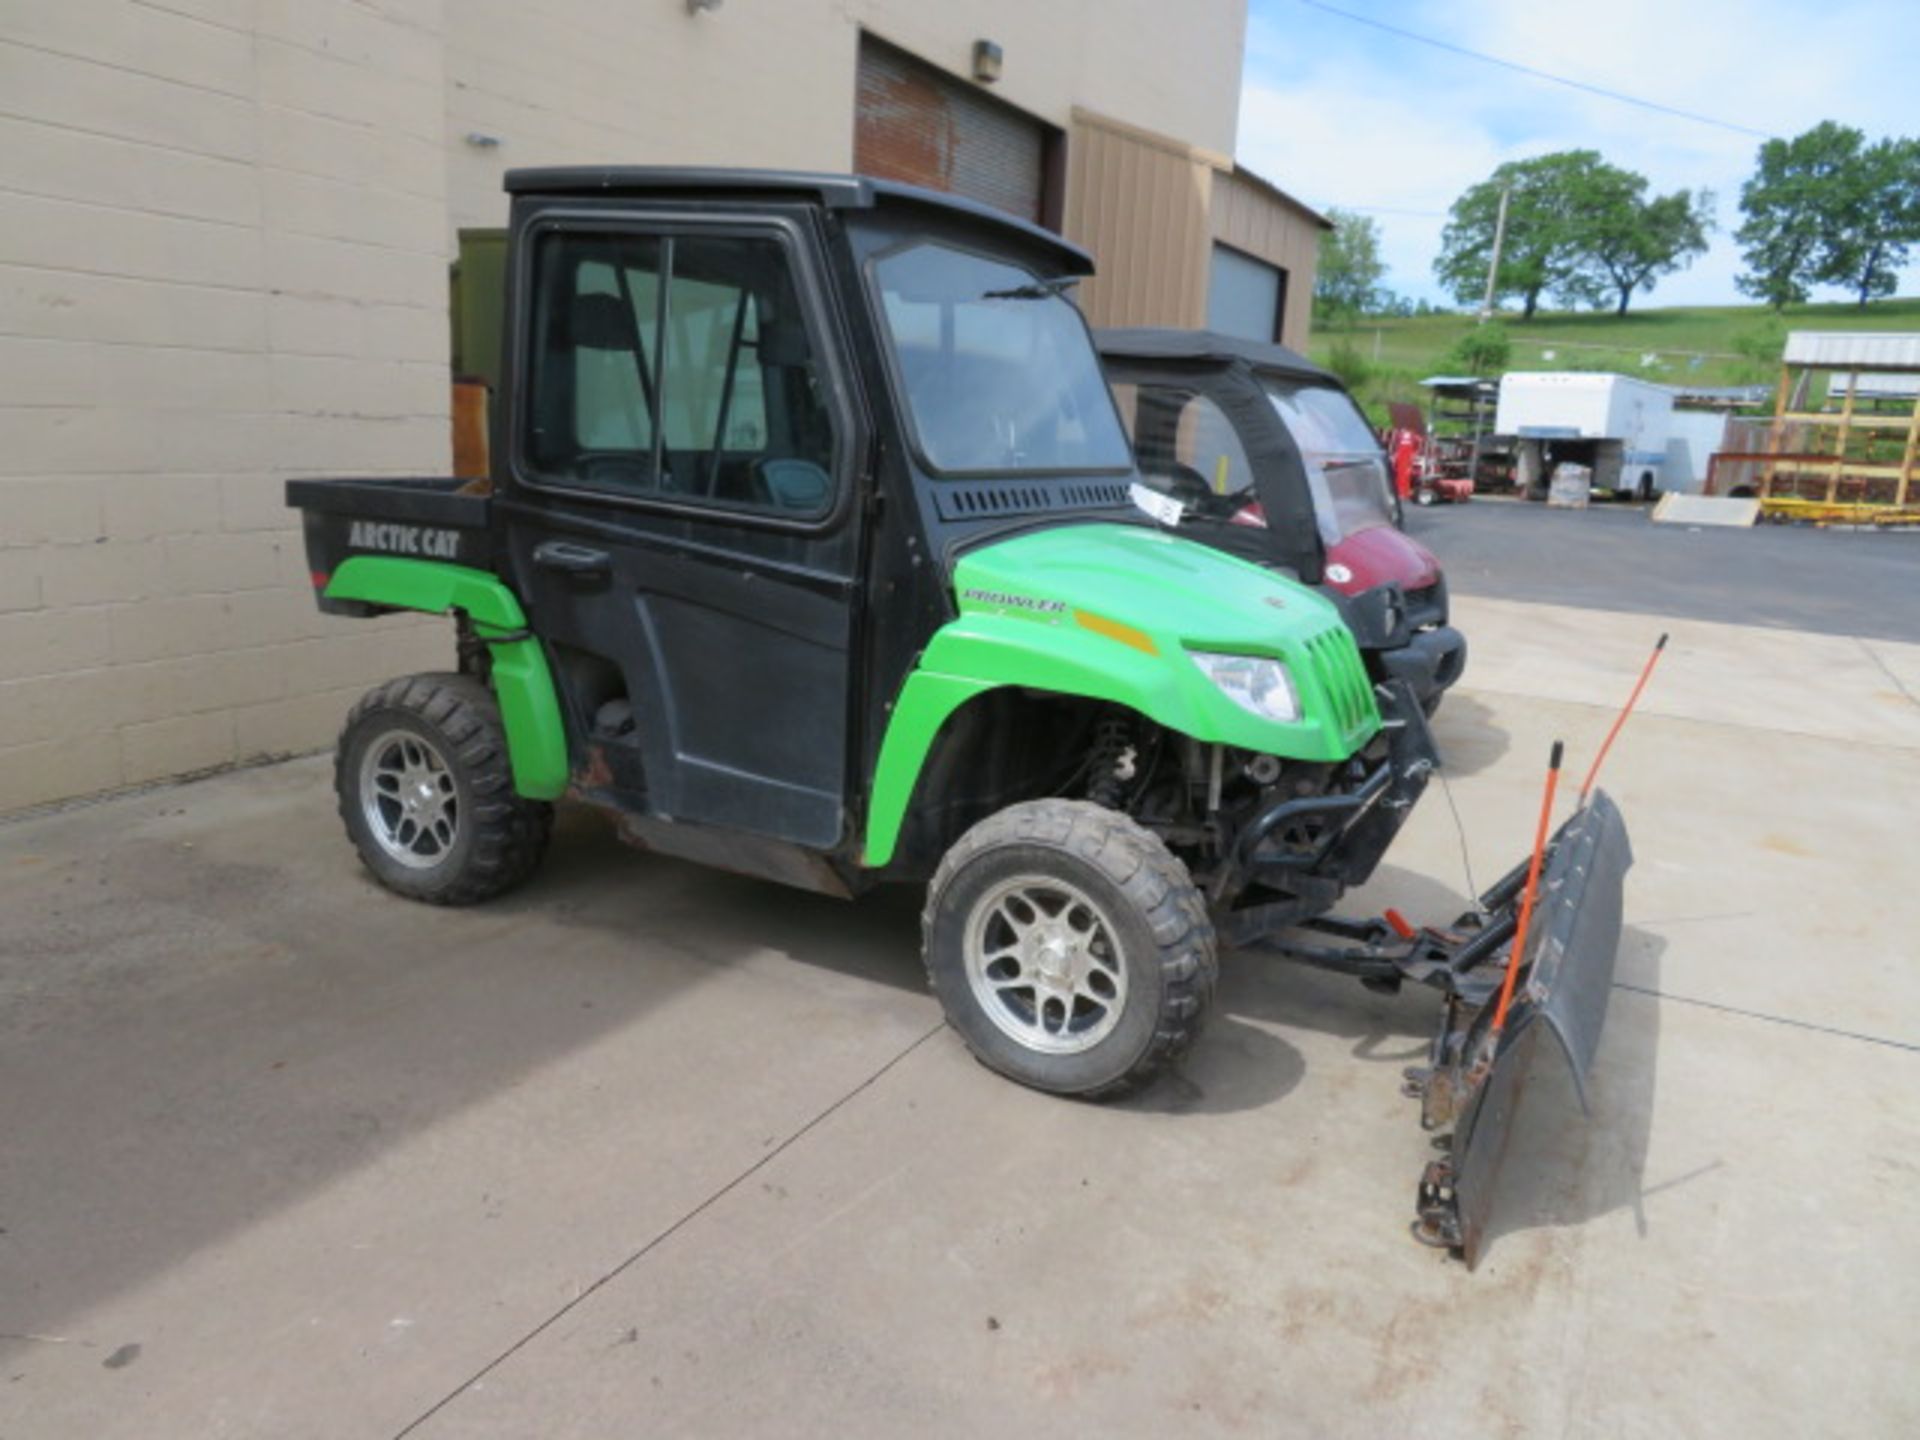 2009 ARCTIC CAT PROWLER XT 650 W/ CURTIS SNOW PLOW W/ CONTROL, ENCLOSED CAB & POLY PICK UP BED - Image 3 of 5